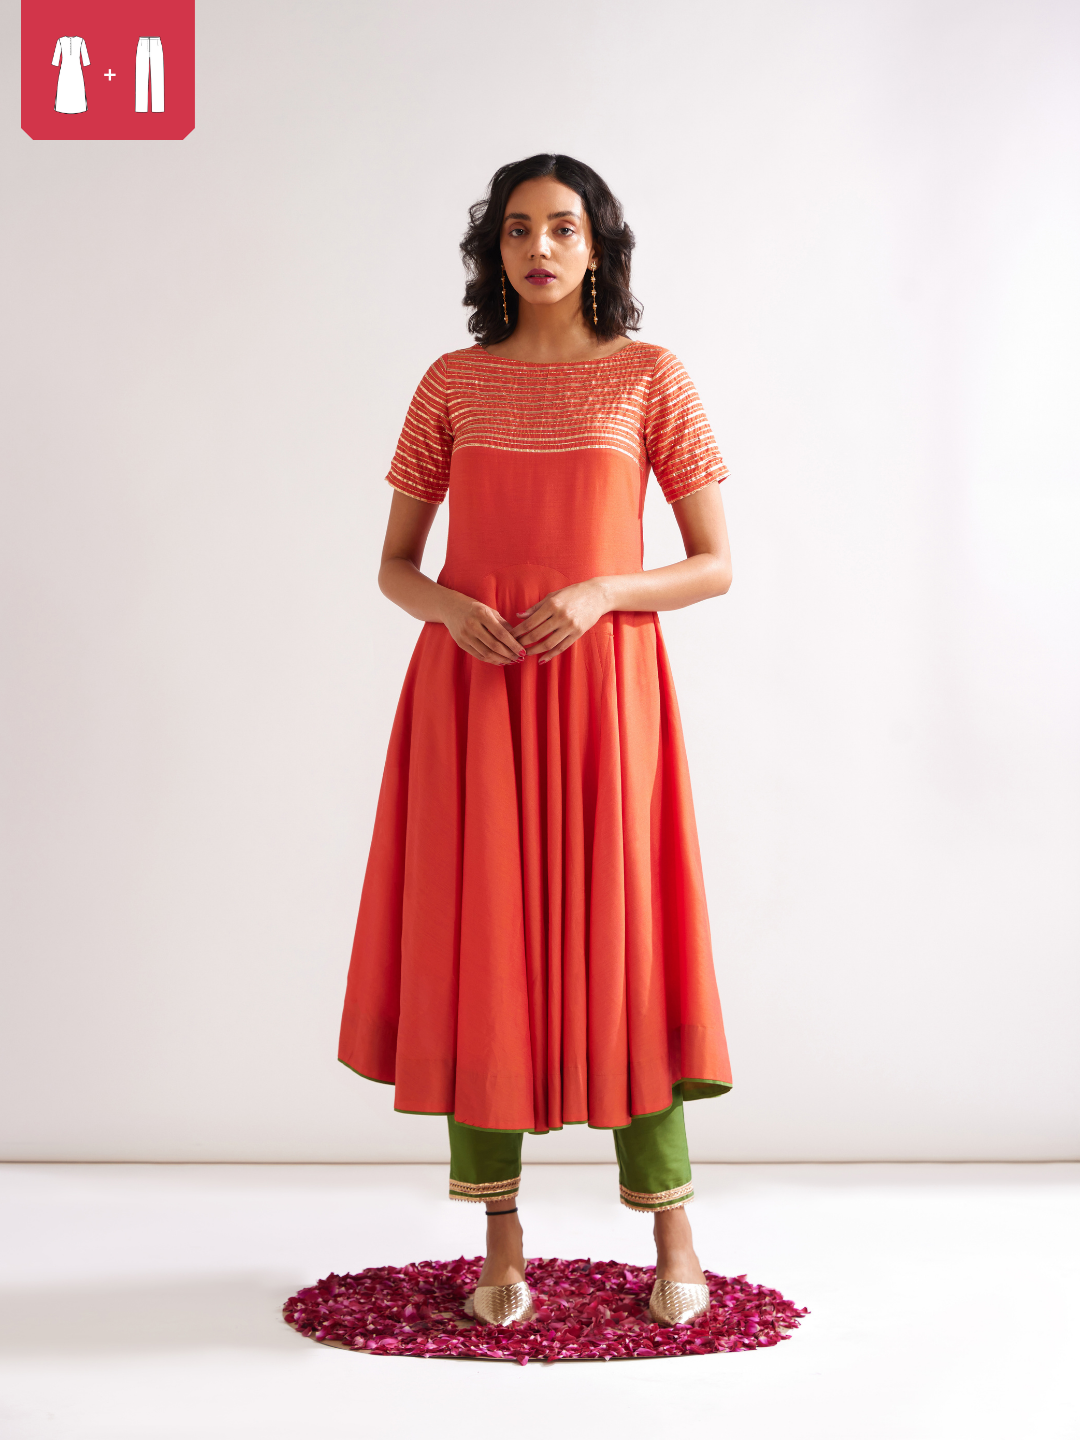 Circular panelled Kurta highlighted with Gota patti yoke paired with pegged pants- Spicy Orange